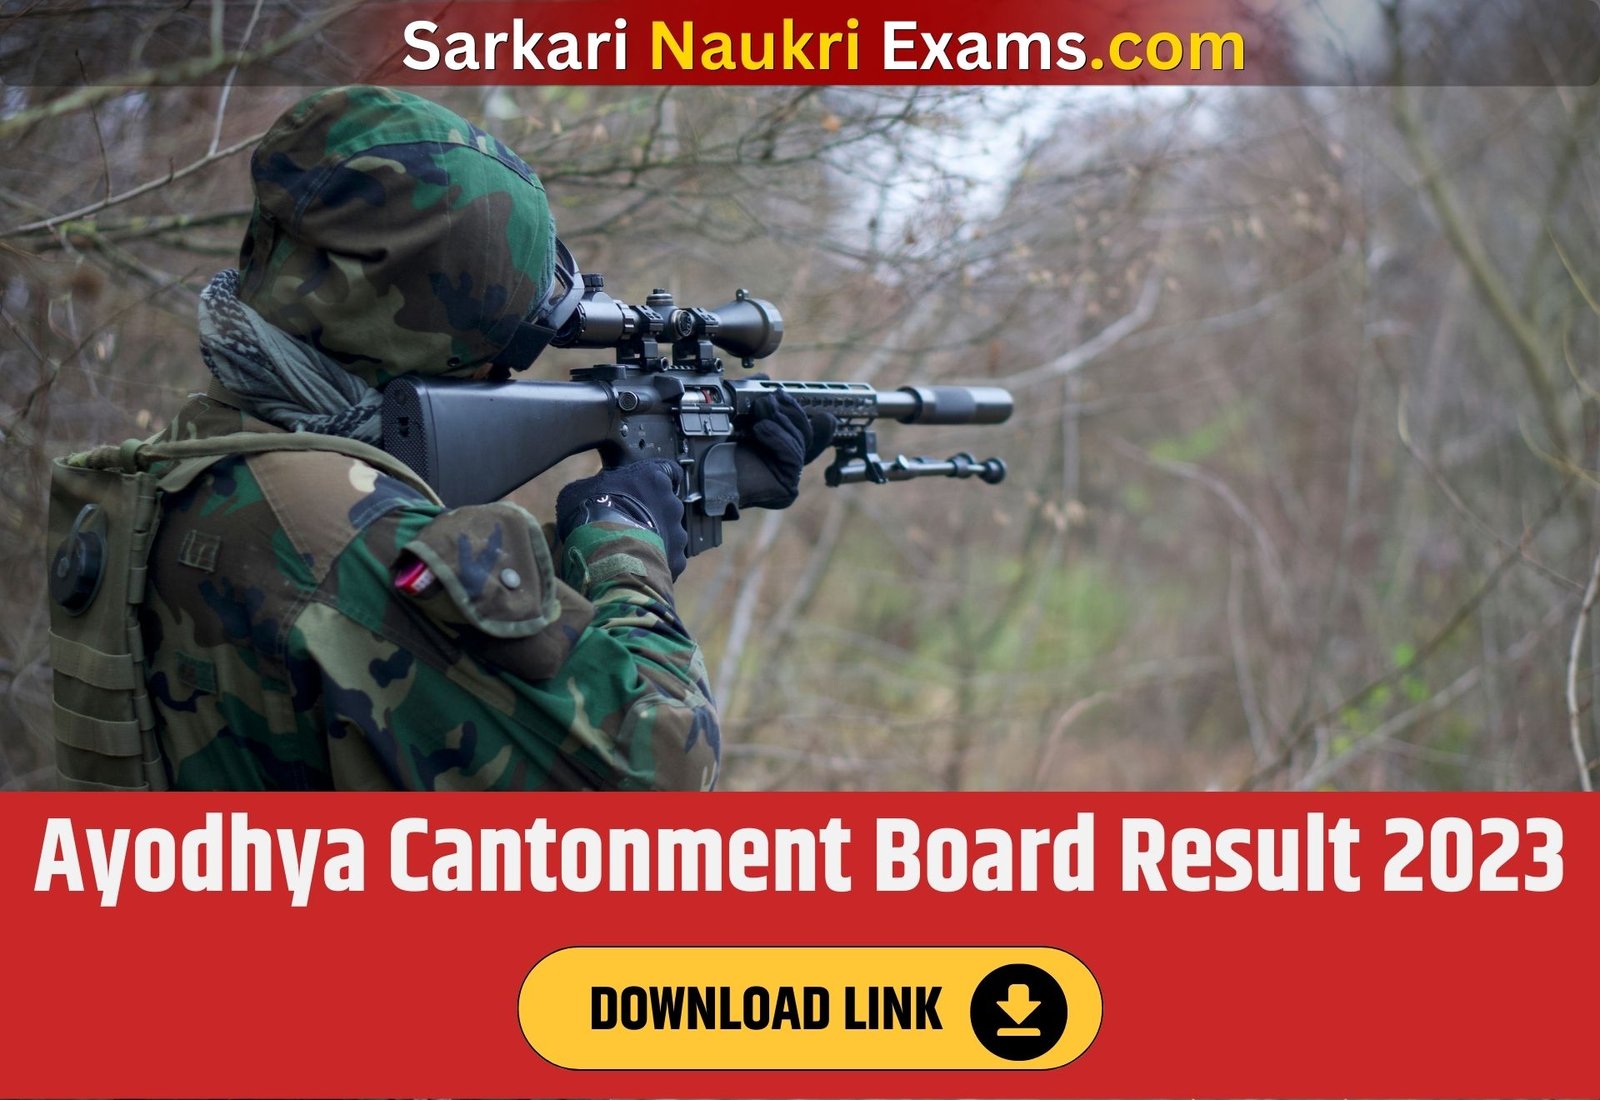 Ayodhya Cantonment Board Result 2023 | Download Link